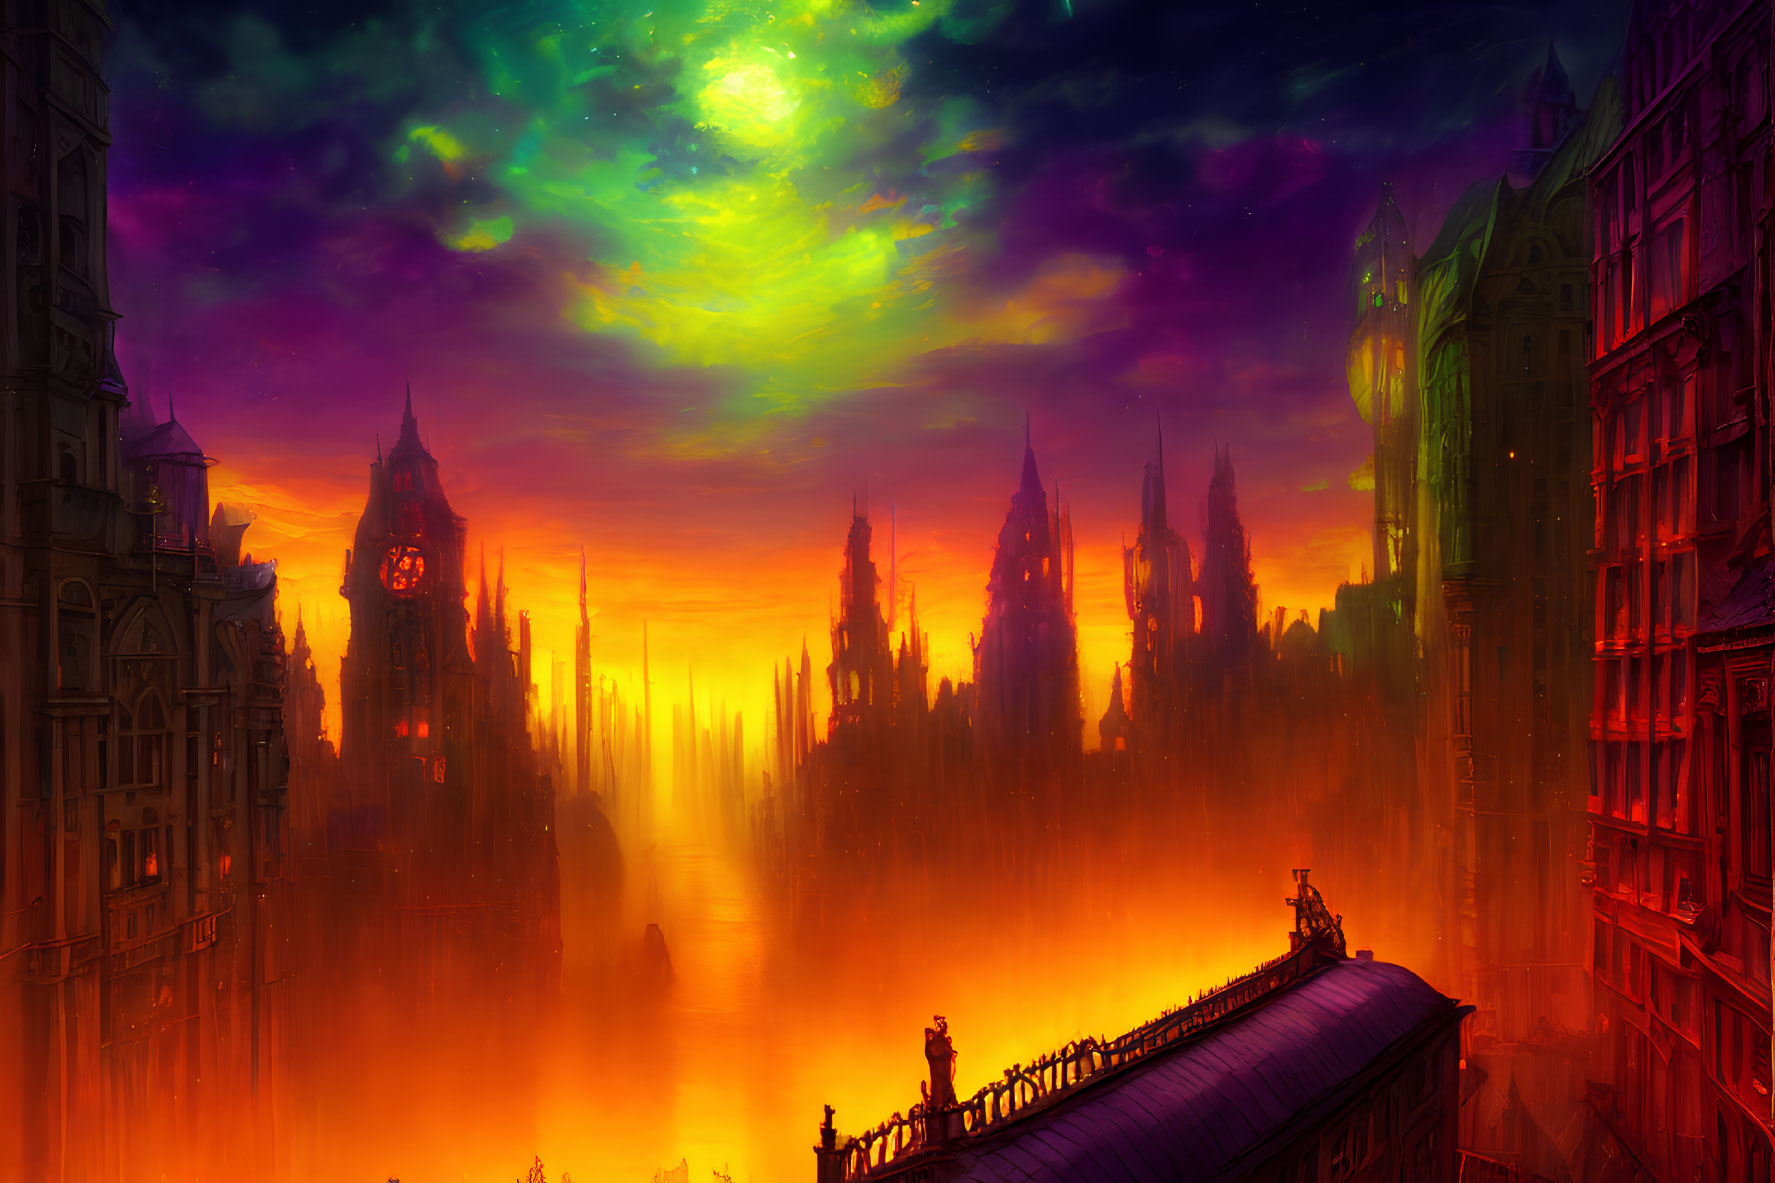 Fantastical cityscape digital artwork with Gothic buildings and colorful sky